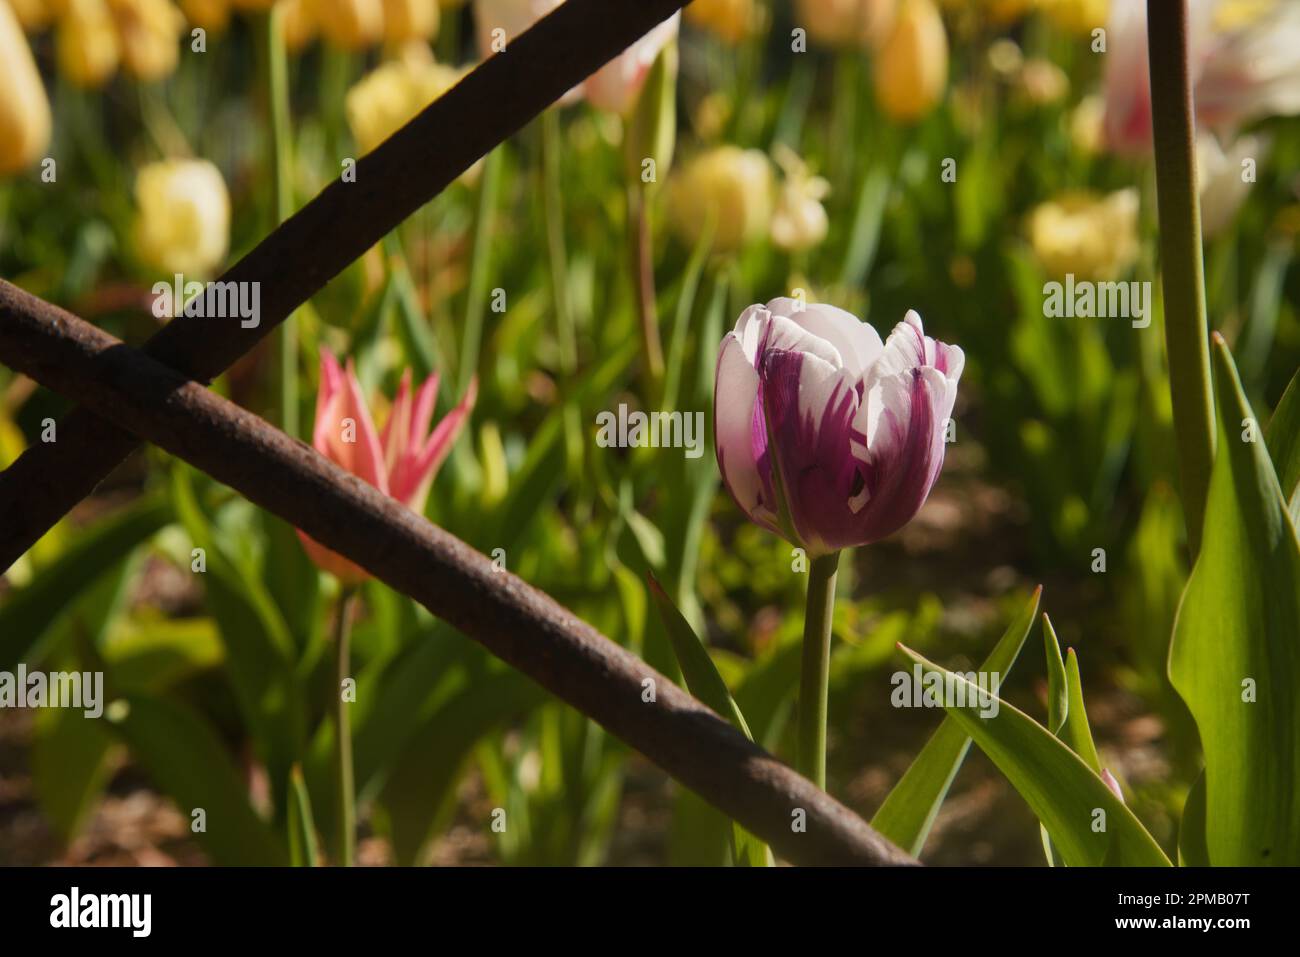 Tulip blossom, signifying spring with mother nature's hand in beasuty and elegance. Garden setting, rich in color & life. Stock Photo